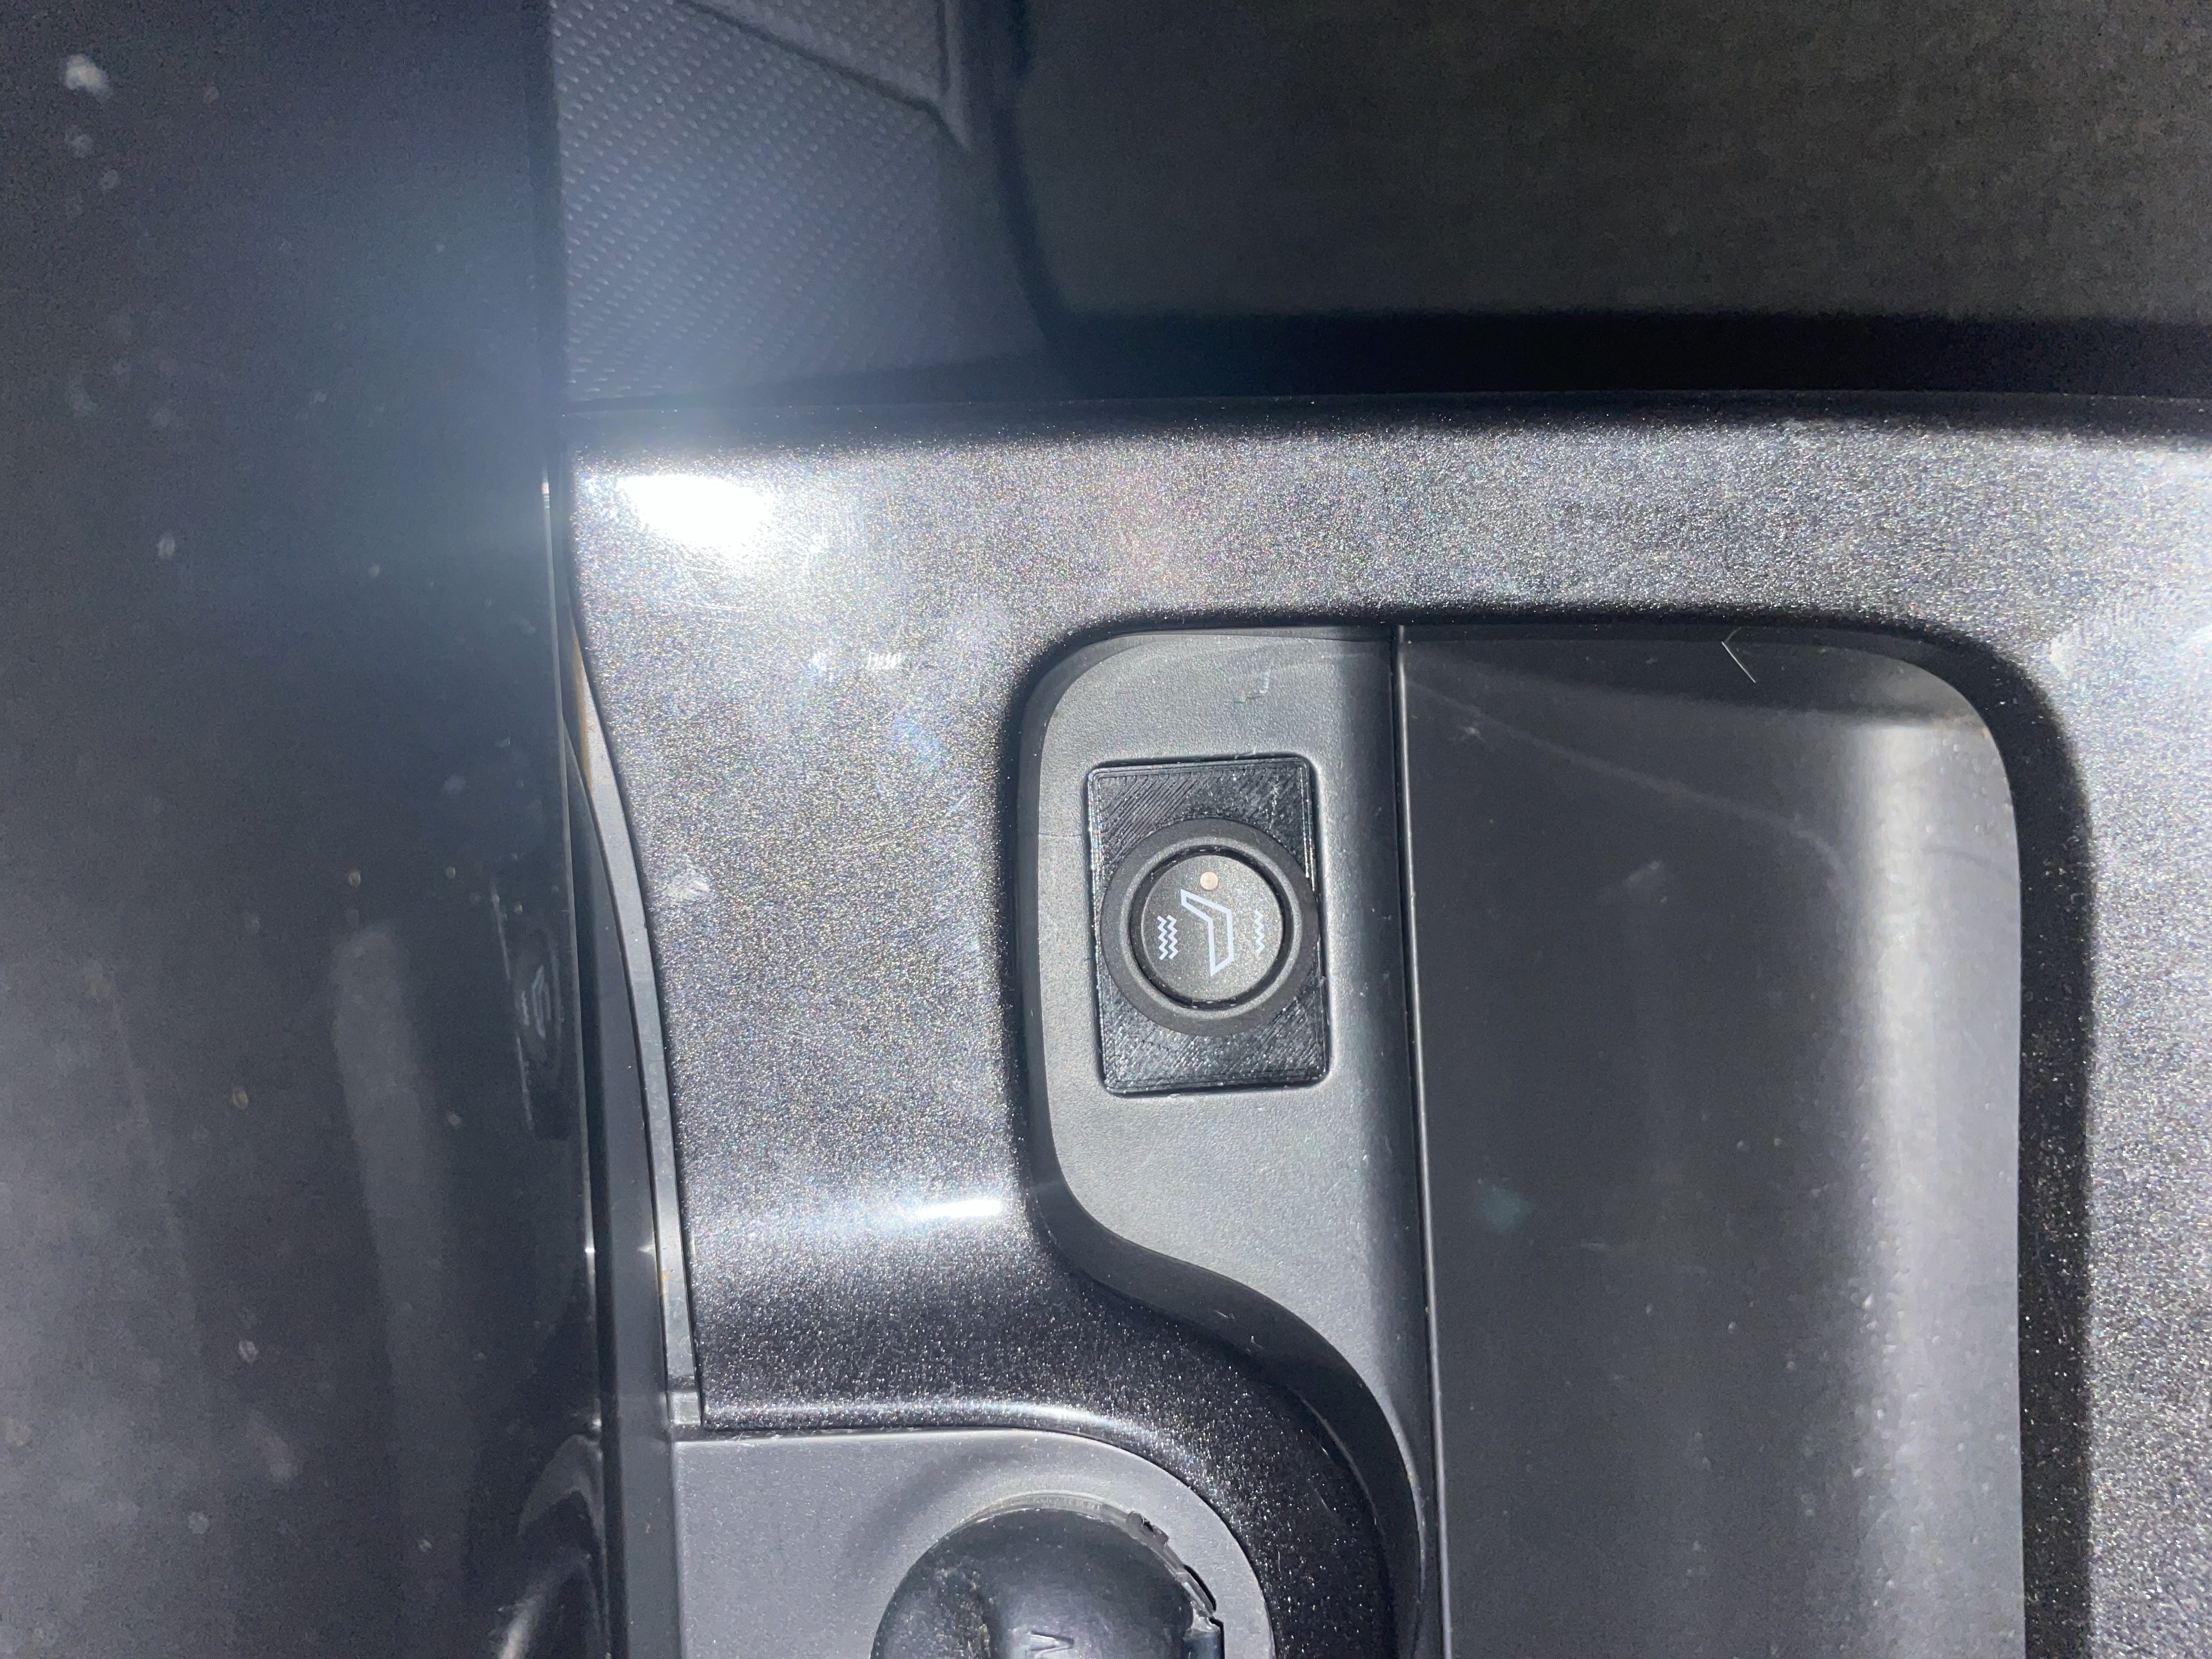 2010 Scion XD blank with Parametric center hole